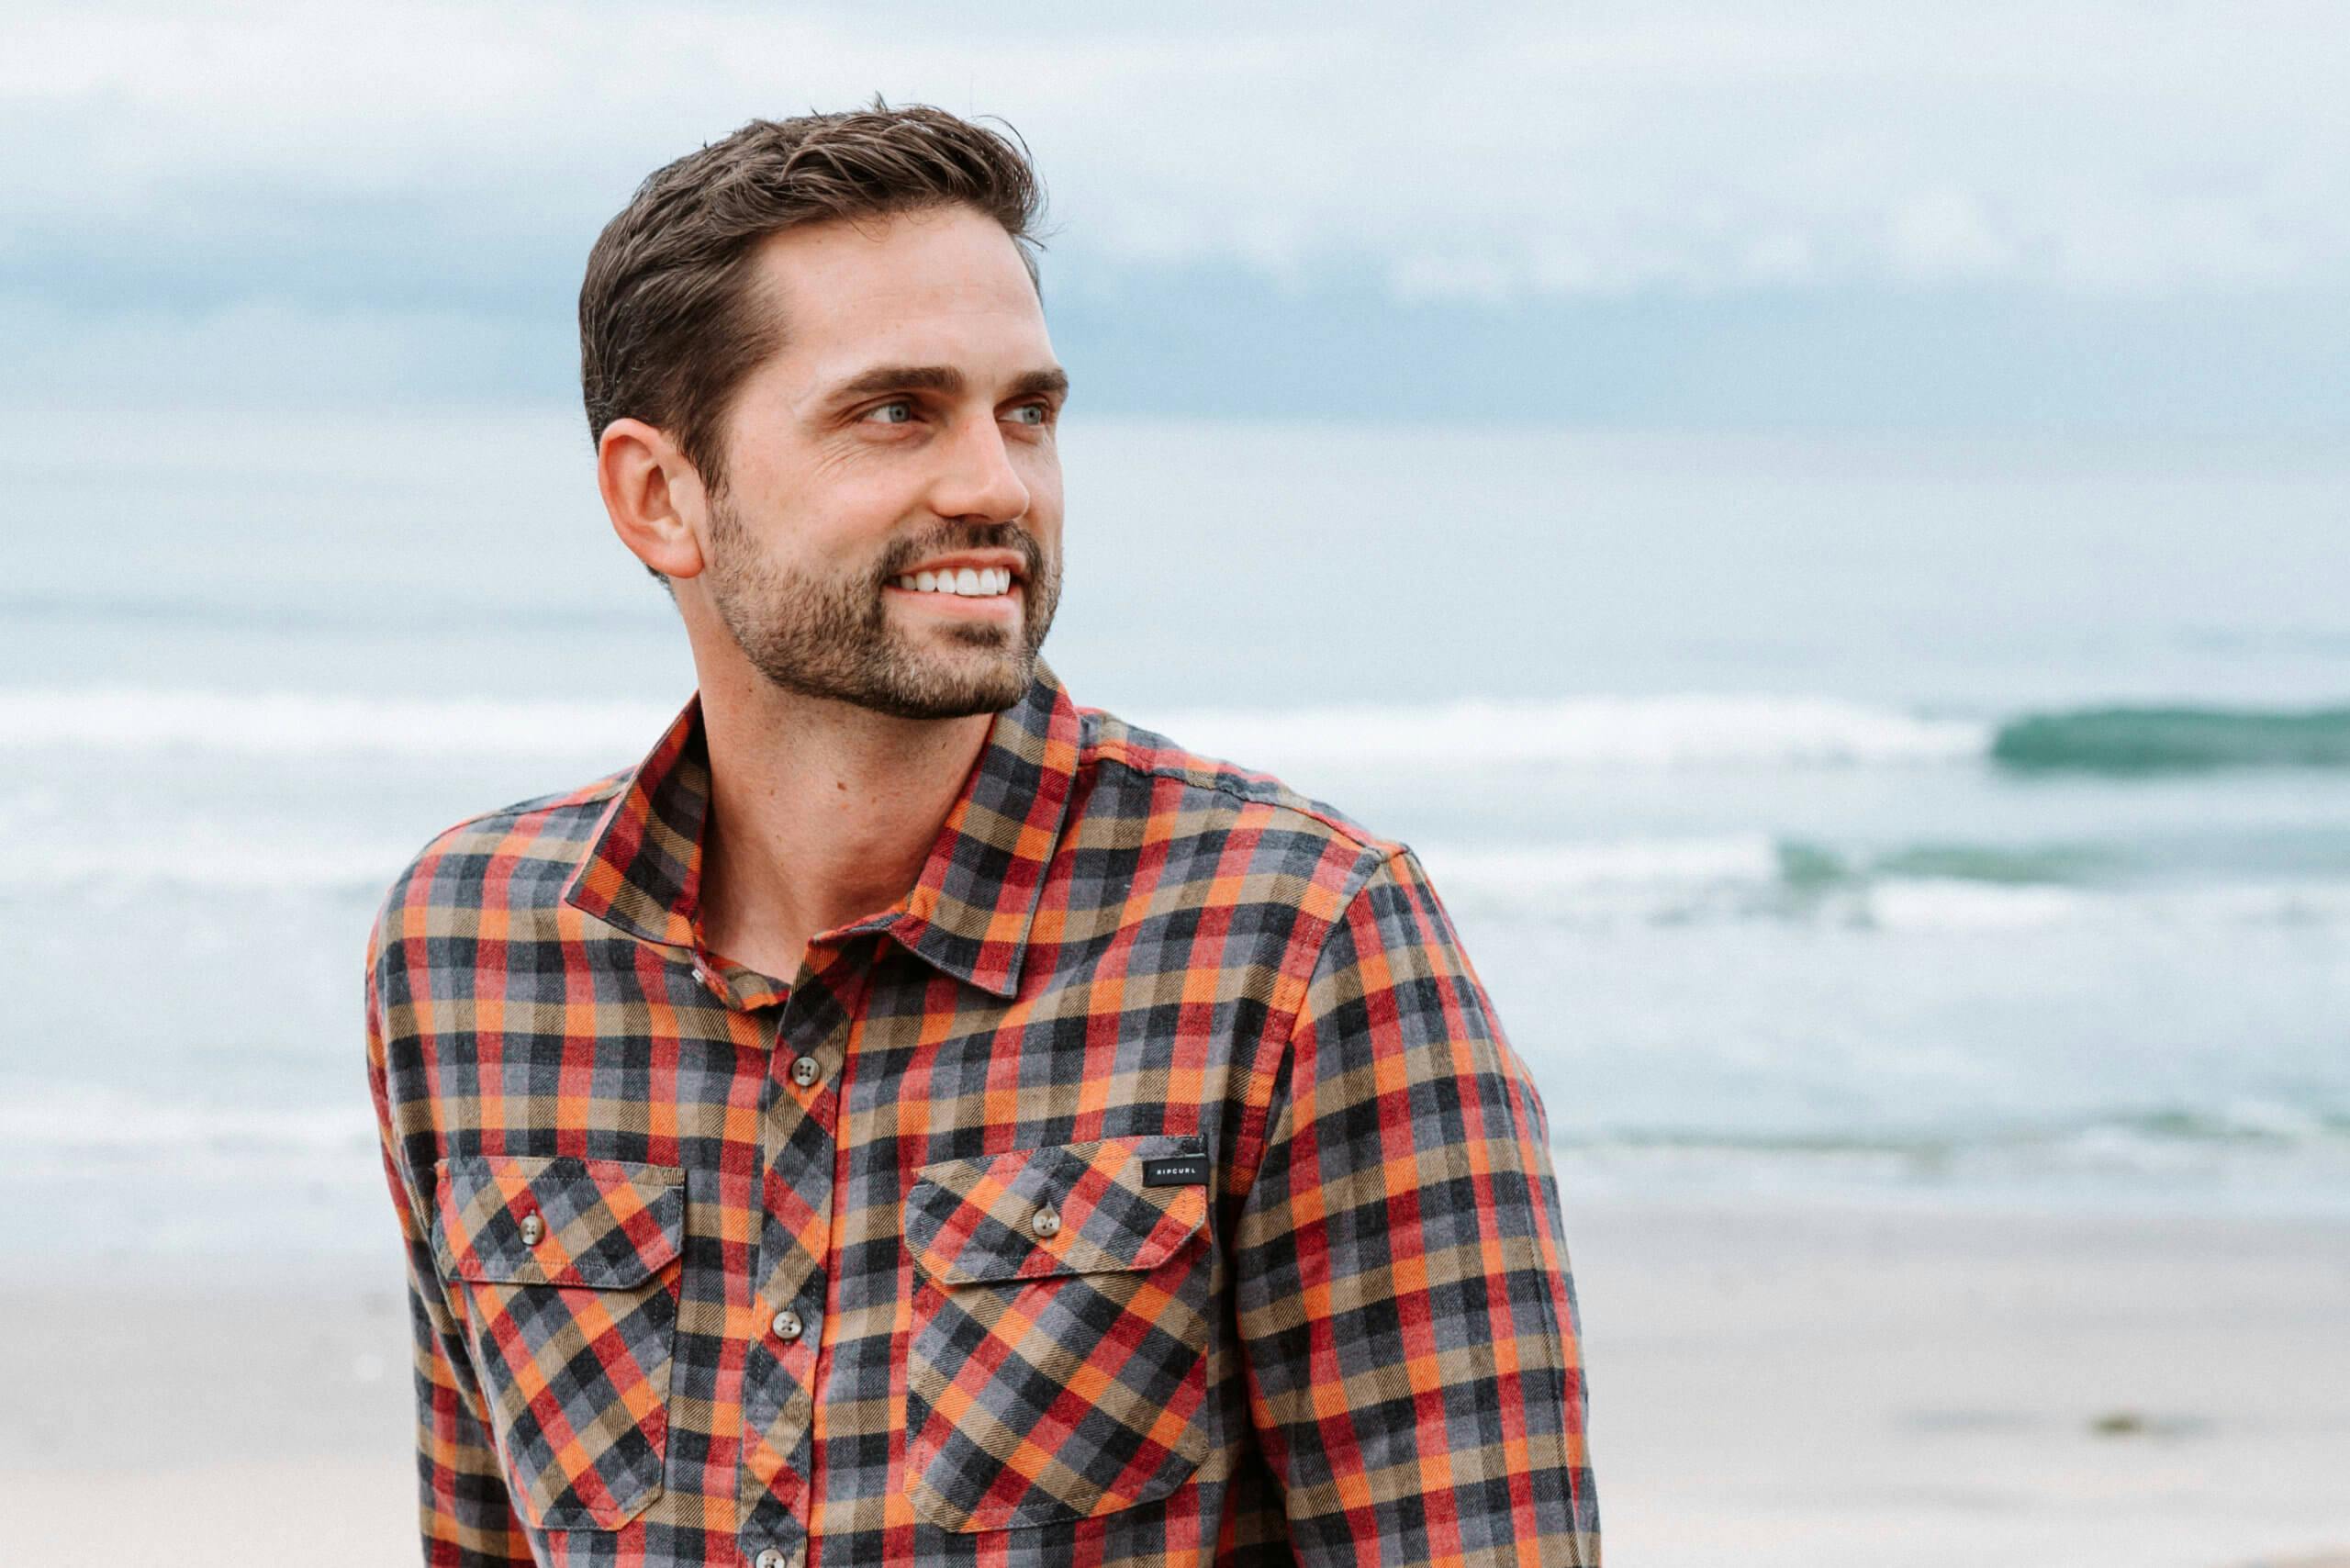 A close-up of a smiling man wearing a plaid shirt with a beach background